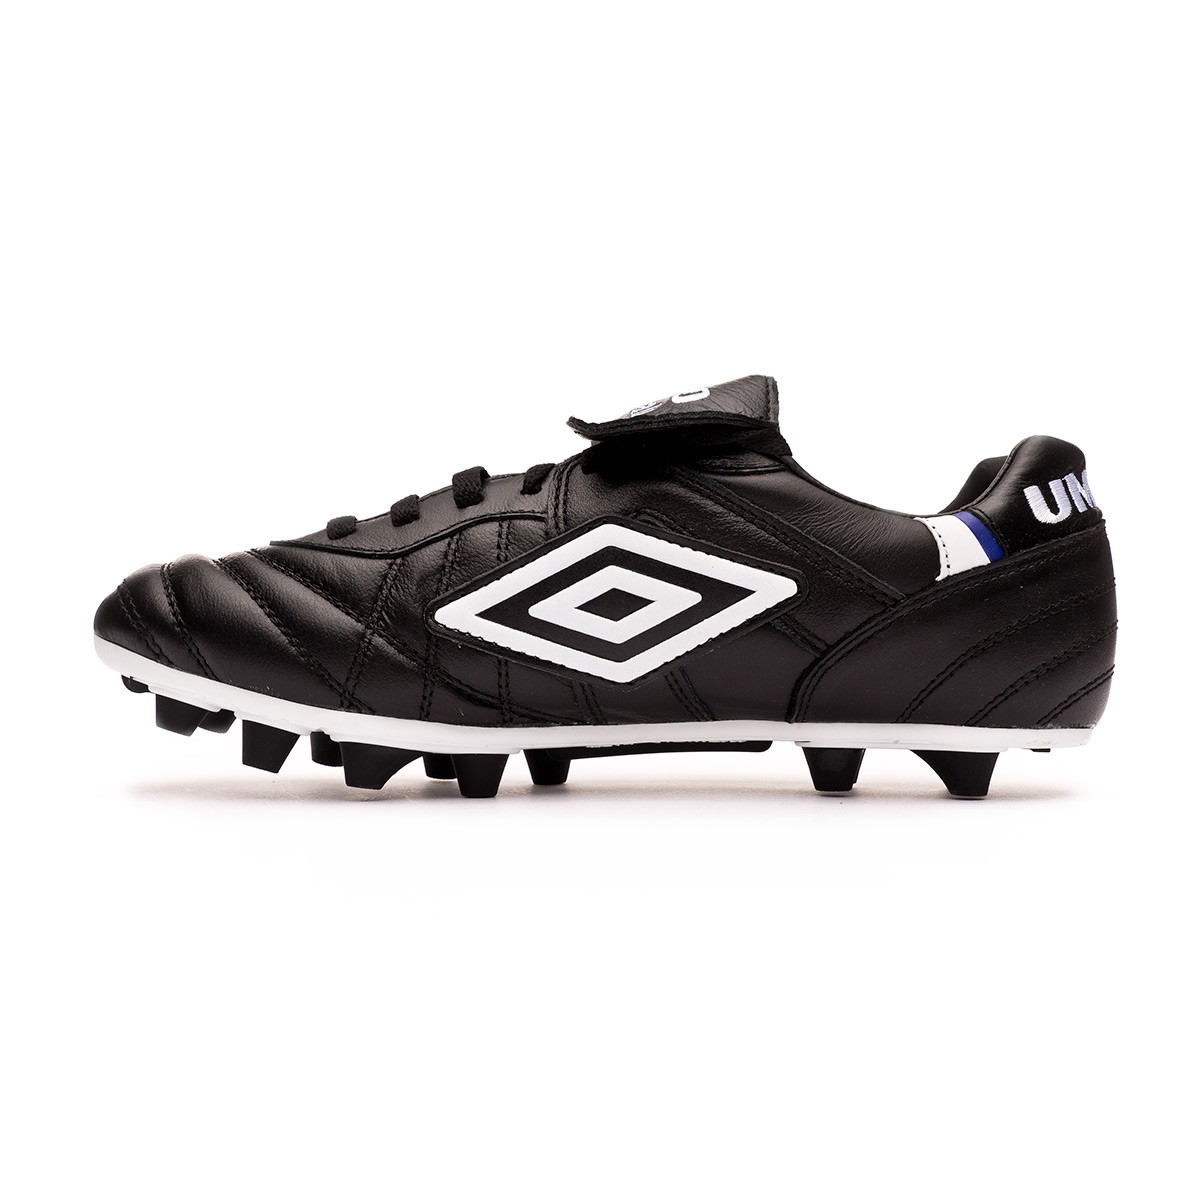 umbro shoes for sale